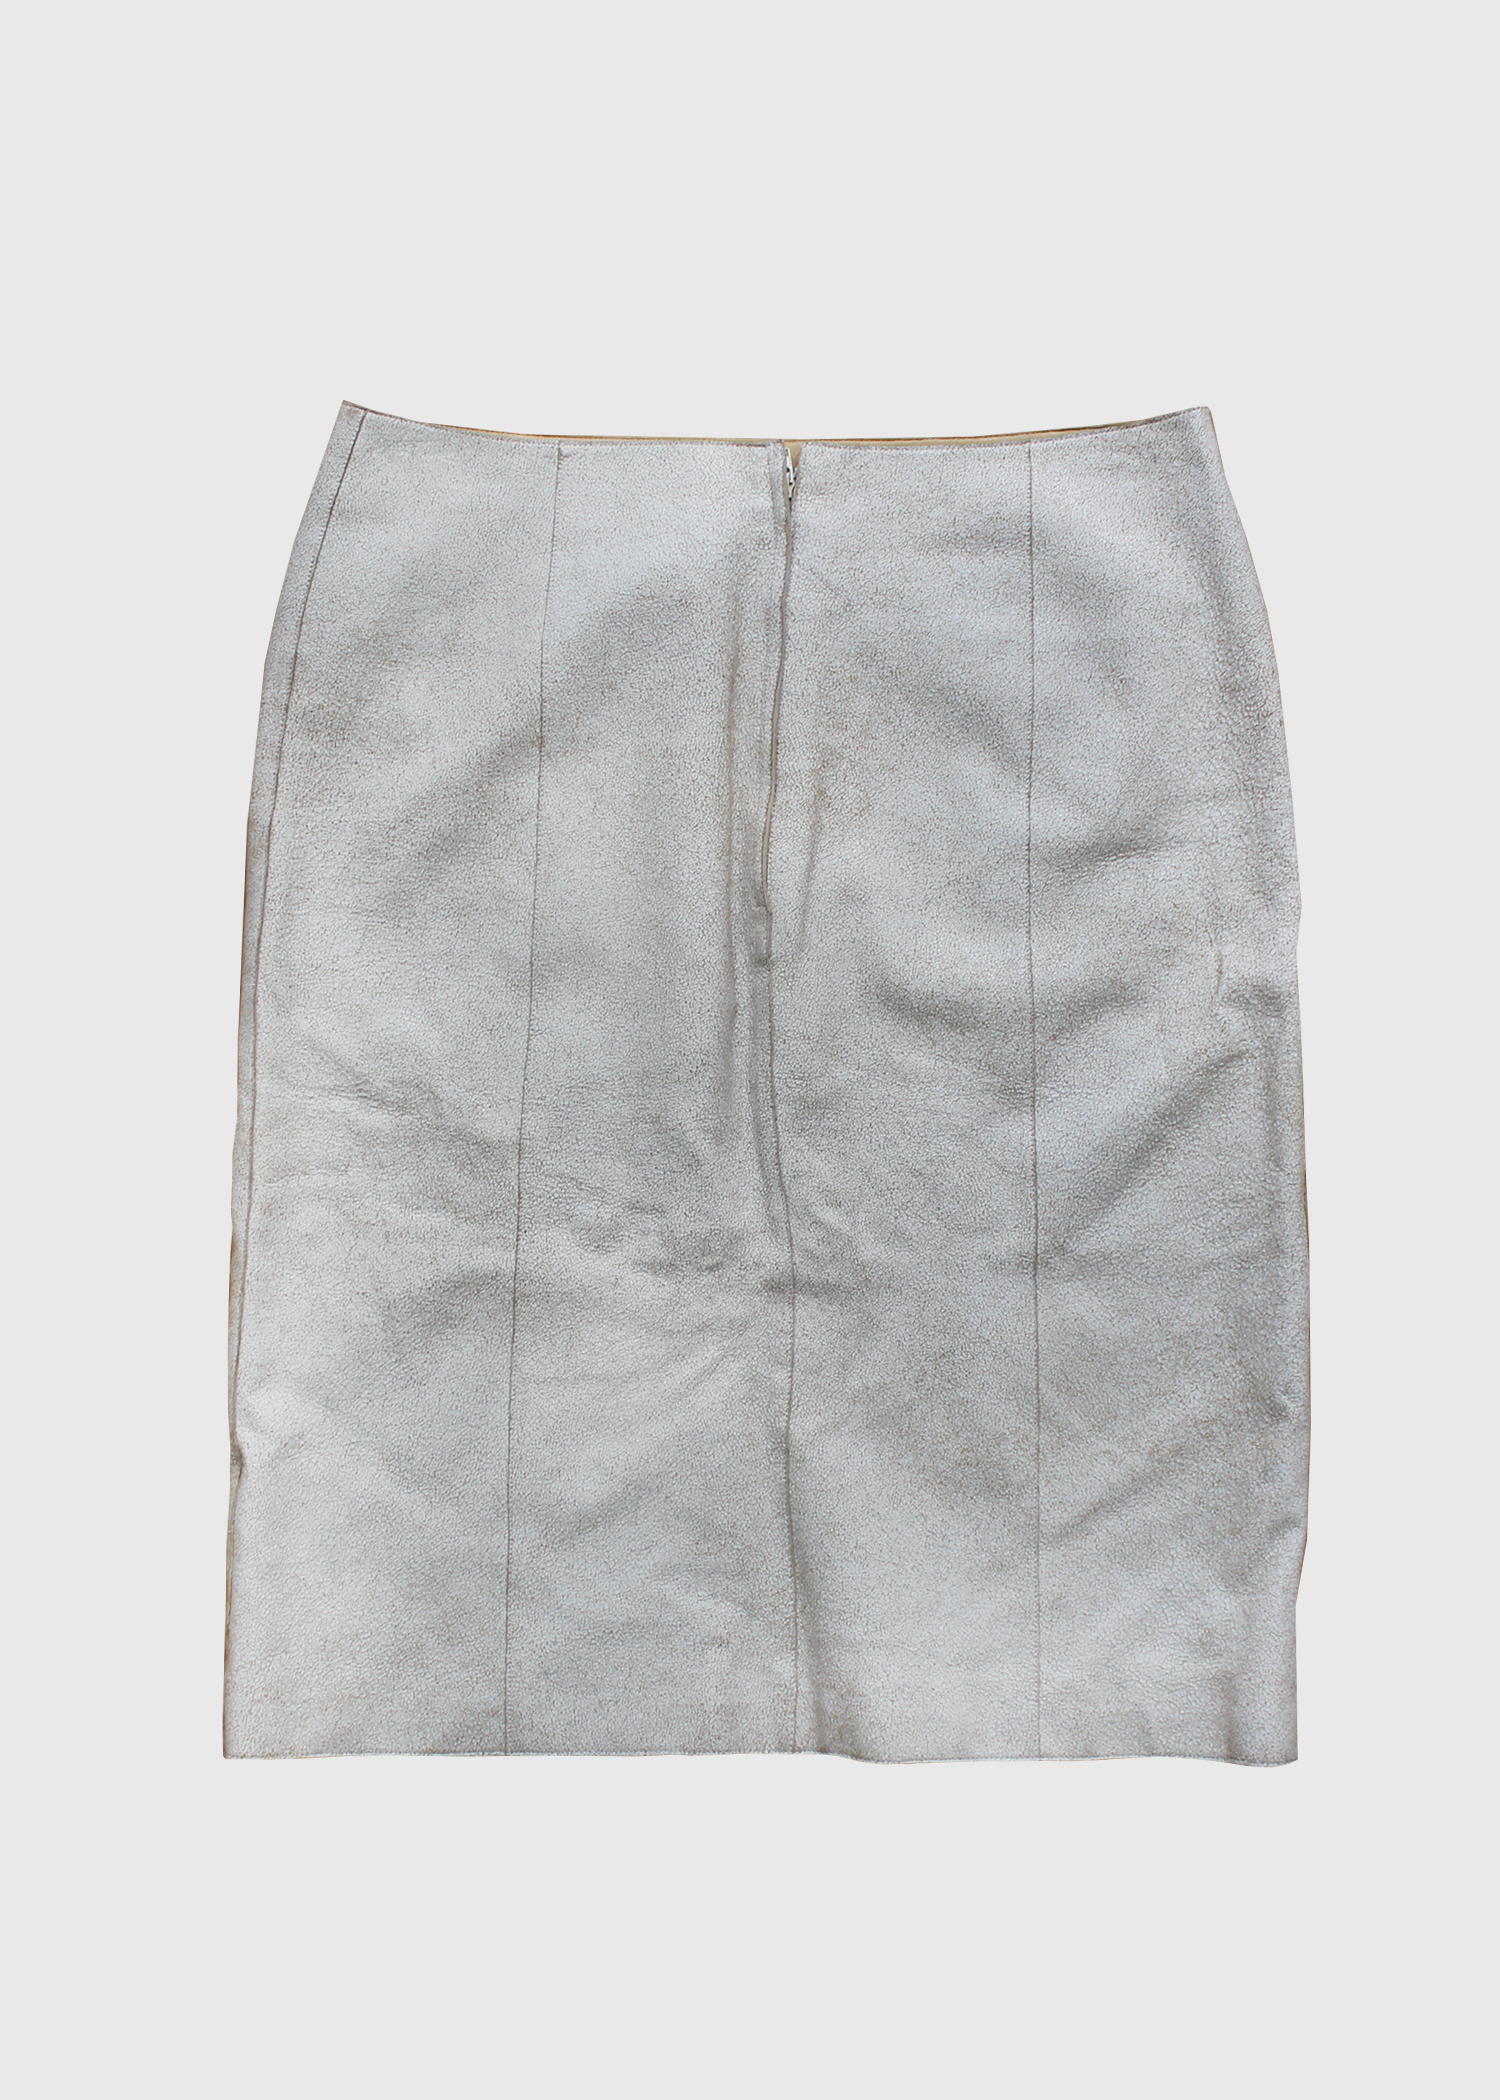 2000s CHANEL Ivory Distressed Leather Skirt- Size FR 40/ US 8